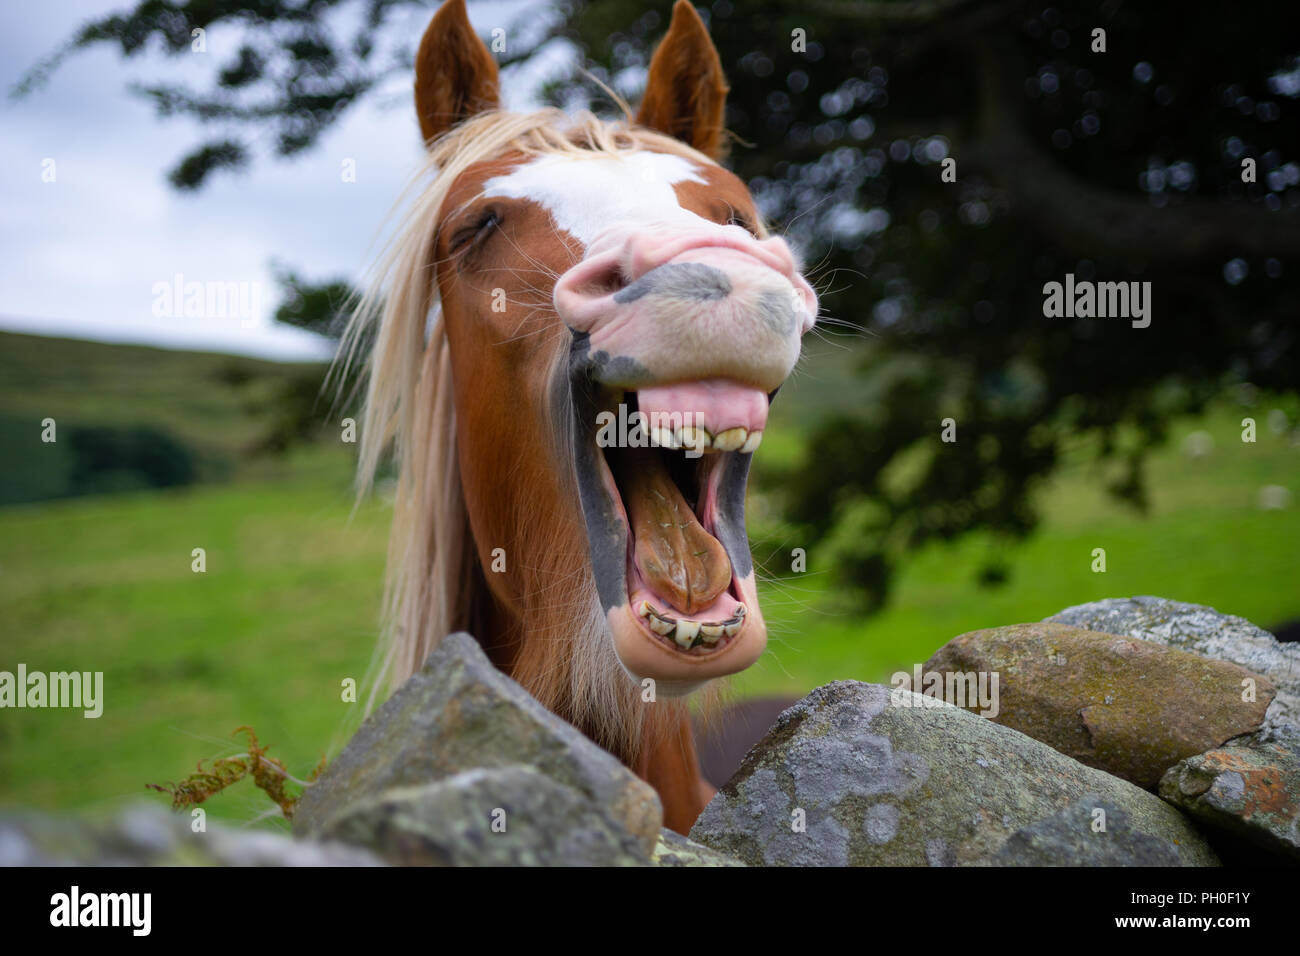 A laughing Horse, I came accross somewhere in Wales. Stock Photo